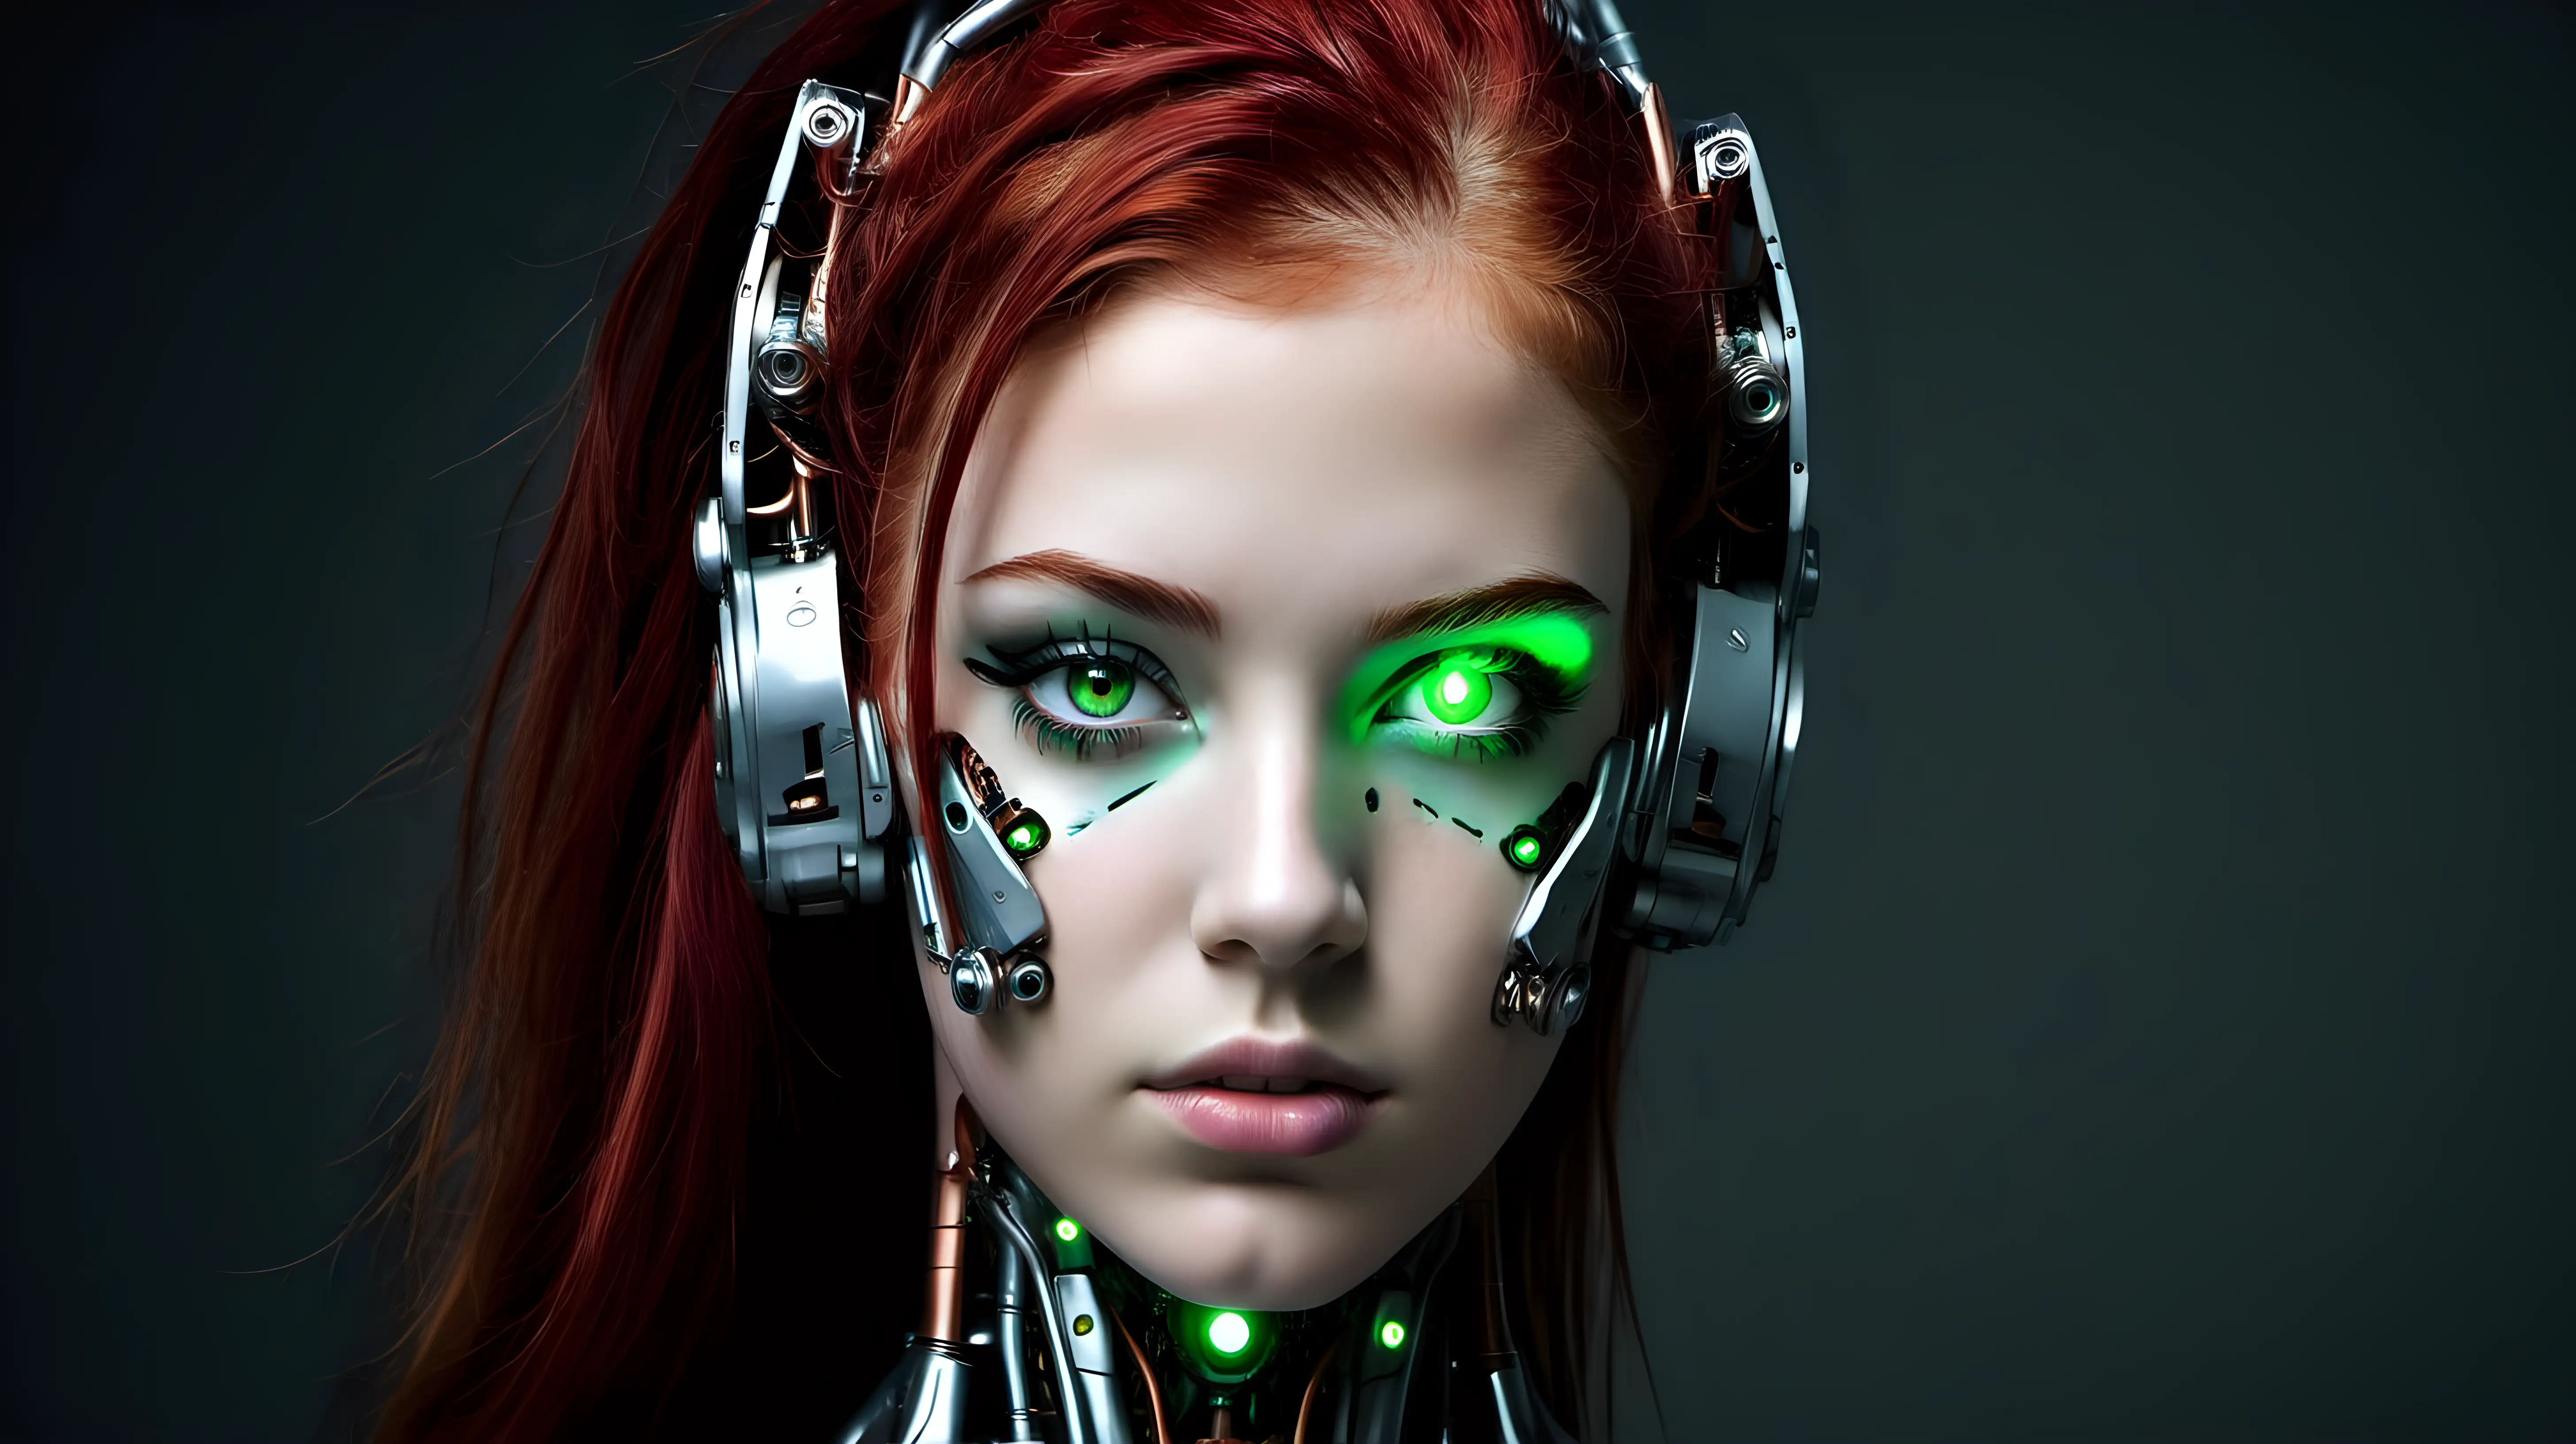 Cyborg woman, 18 years old. She has a cyborg face, but she is extremely beautiful. She has red  hair and green eyes. She is drop-dead gorgeous. Her ears are beautiful.